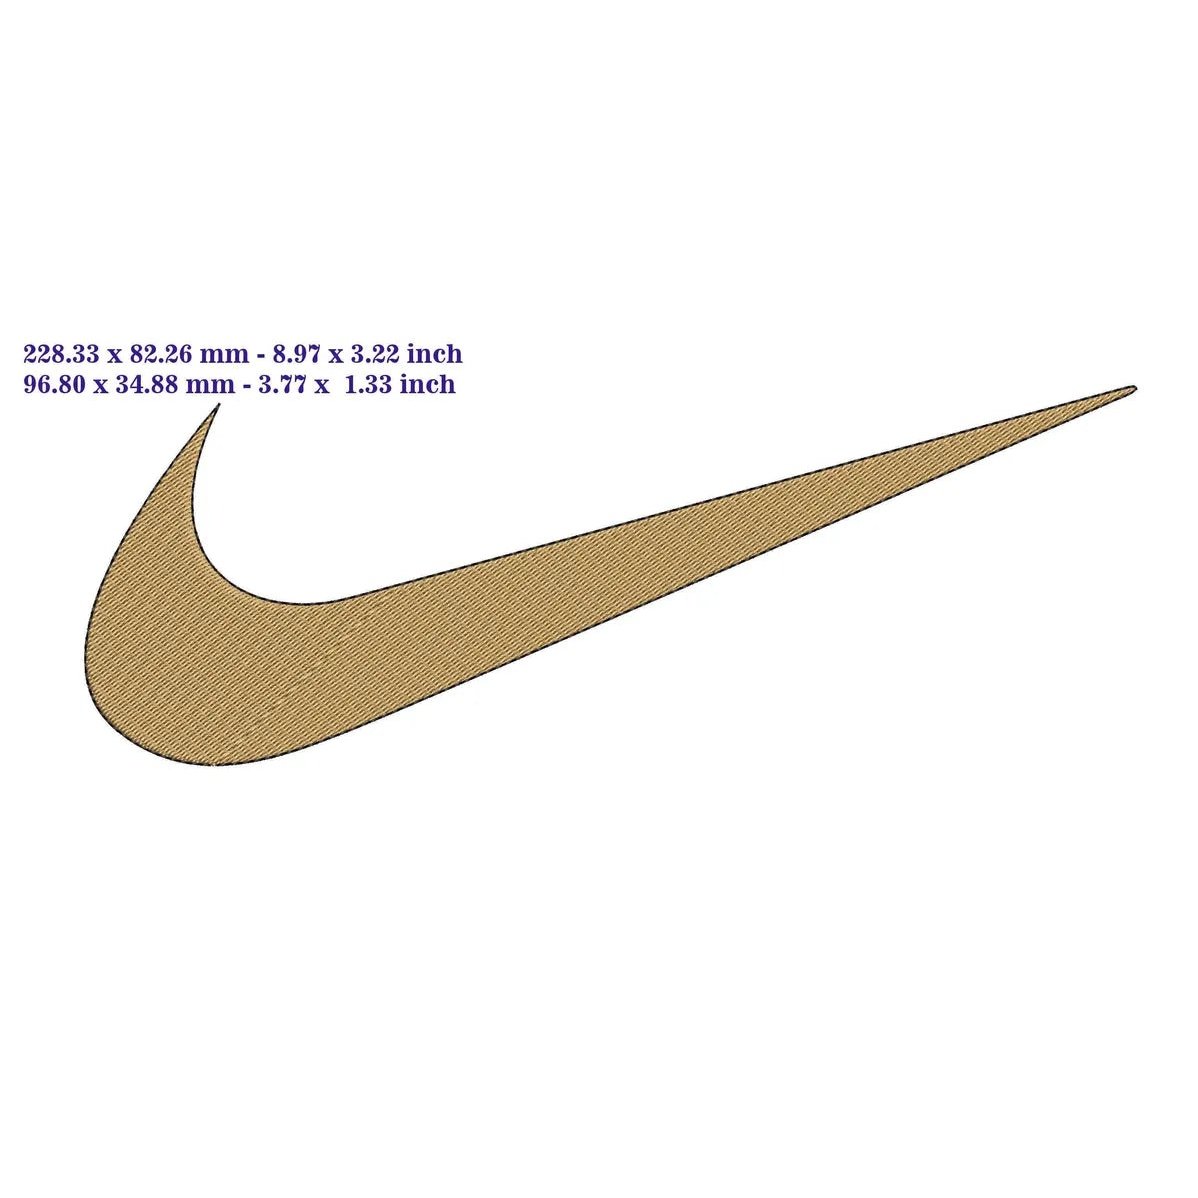 Nike gold logo - Embroidery Design FineryEmbroidery